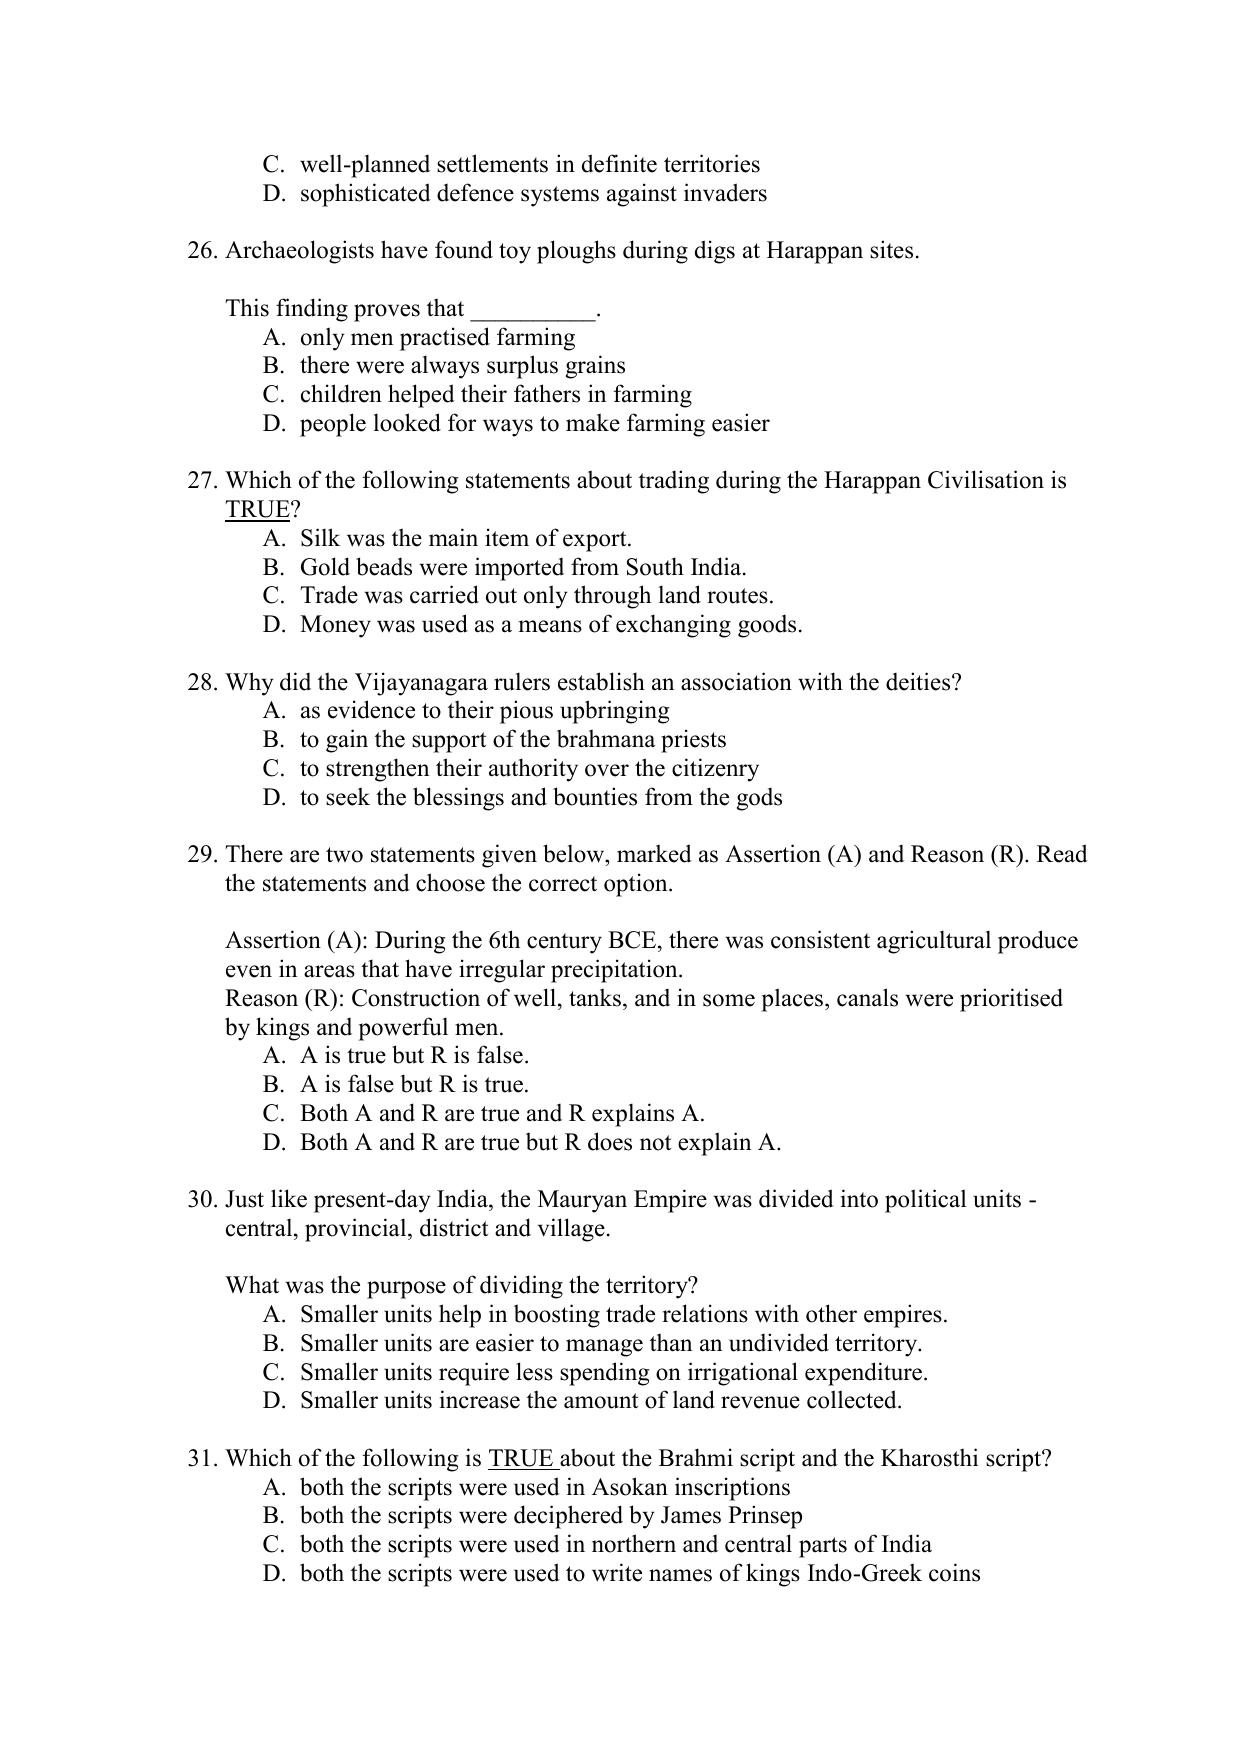 CBSE Class 12 History Term 1 Practice Questions 2021-22 - Page 6